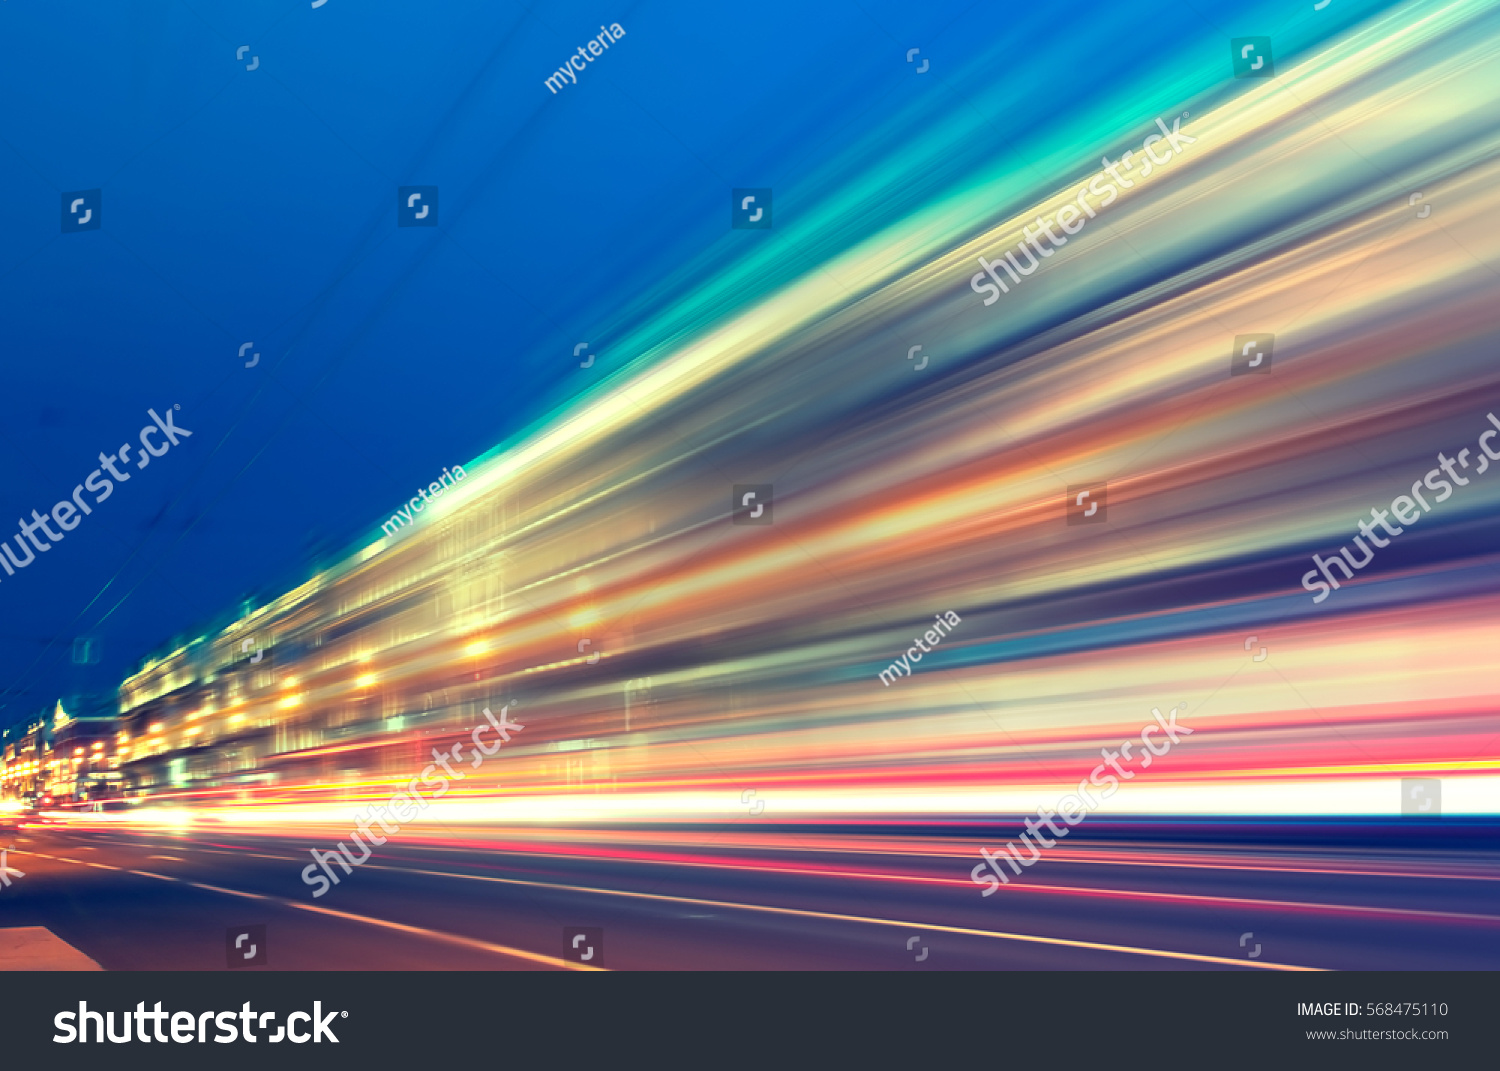 abstract image of blur motion of cars on the city road at night #568475110